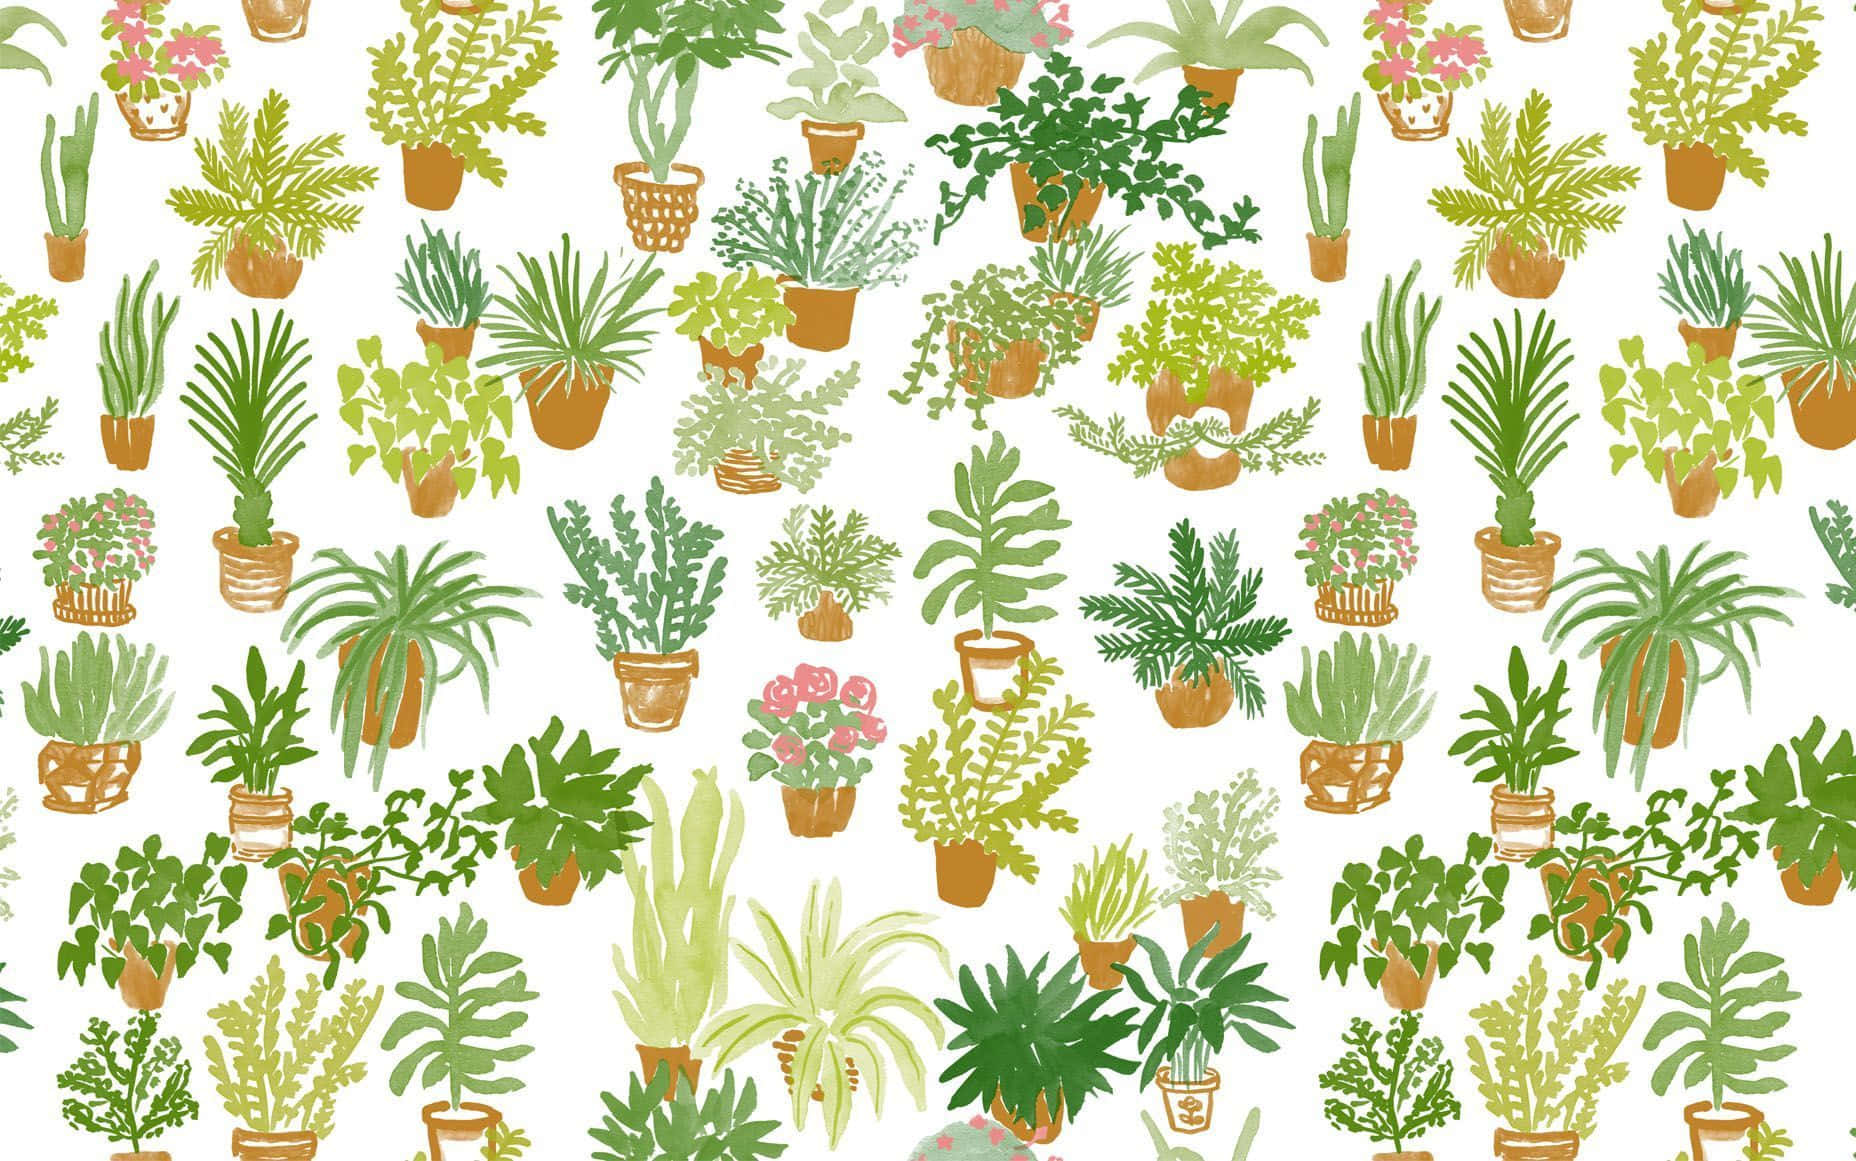 Bring some extra color and life to your home decor with this cute and aesthetic plant! Wallpaper